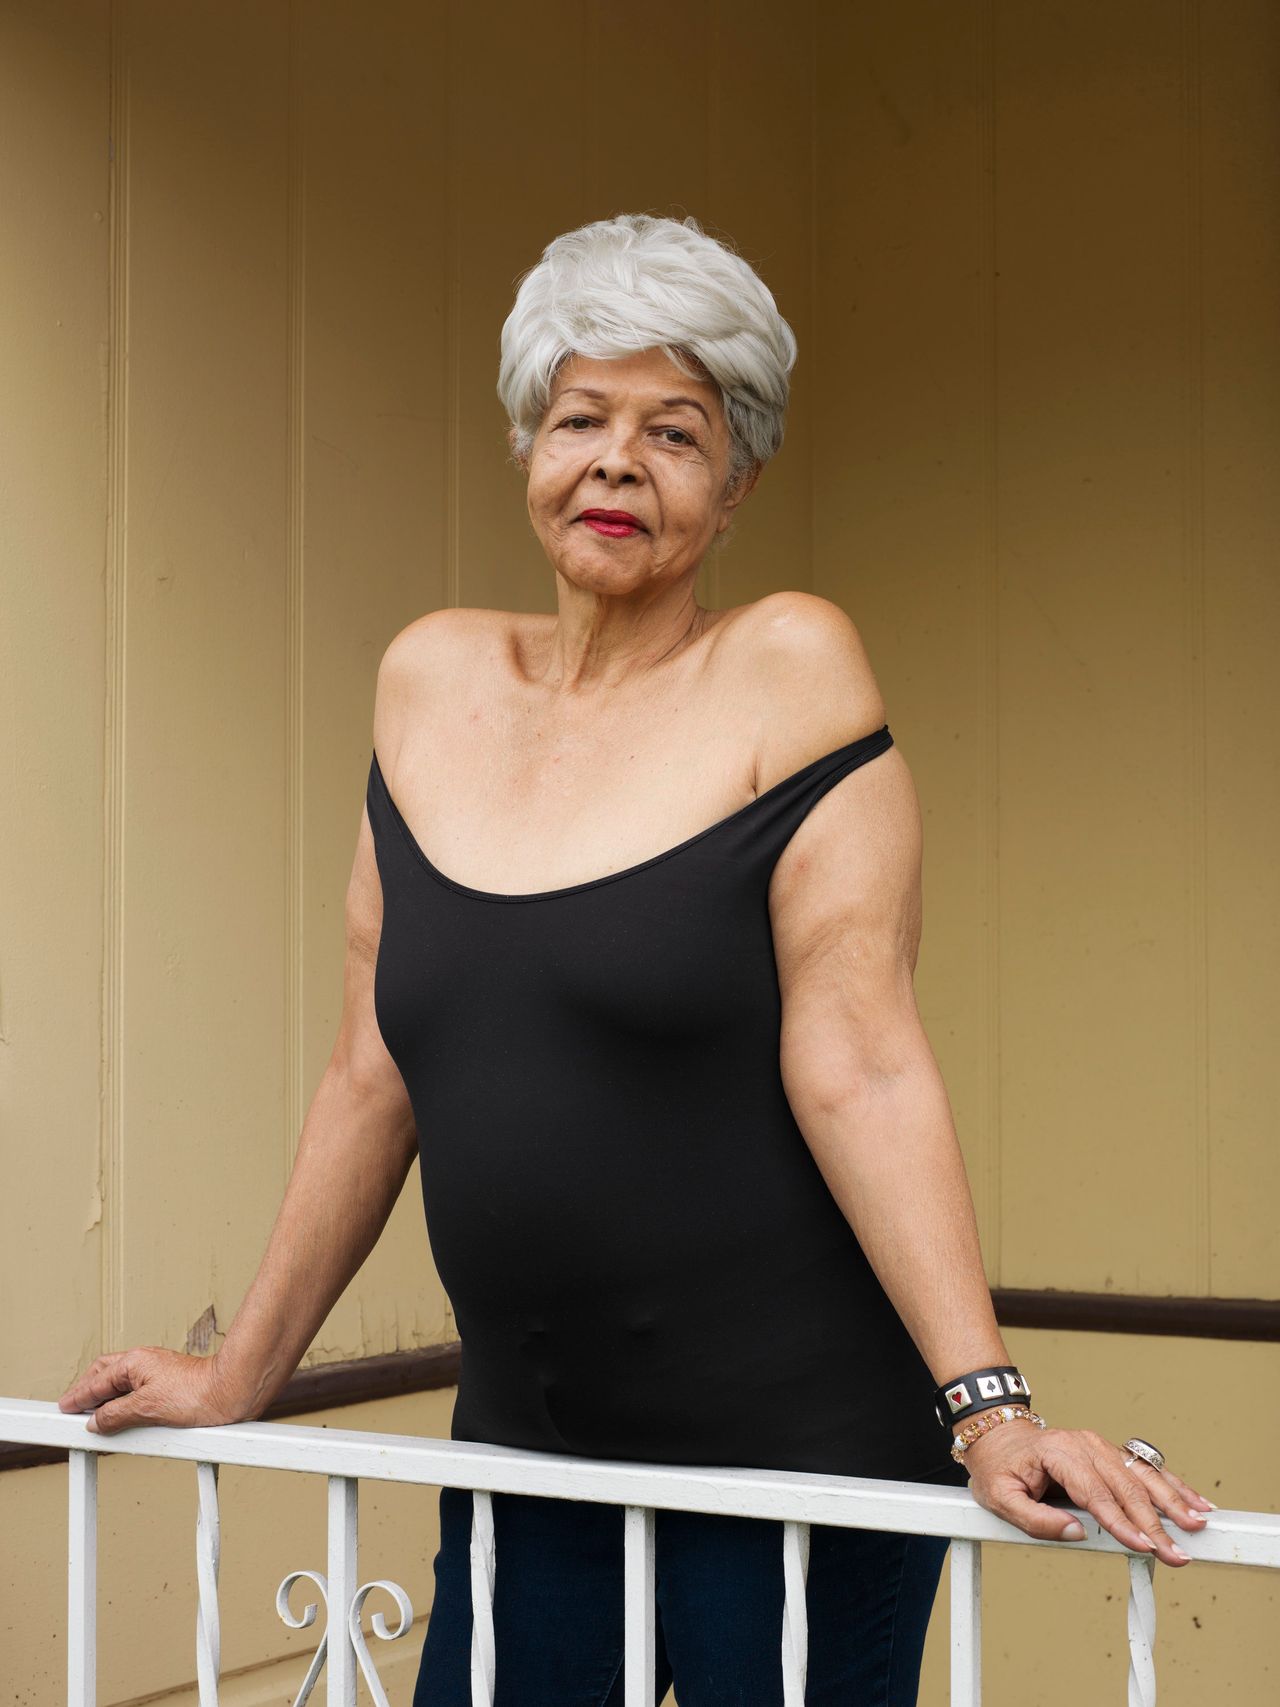 Dutchess Milan, 69, Los Angeles<br><br>“My mother said when you die, you stand there before the light, and you say, 'Was I worthy of myself to know that I have liked me?' OK? I like me. OK? And I will tell the whole chorus, honey, 'I like me.' I don't hurt anybody, I don't do anybody wrong, you know. I’ve dealt with everything I can, as much as I can. So just find that inside yourself and take time with that person. Faults, flaws, wishes, all of it — it doesn't matter. We're not going to get it all. None of us gets it all. OK? But what we do have, we can polish. We can polish it, honey, till it blinds them.”